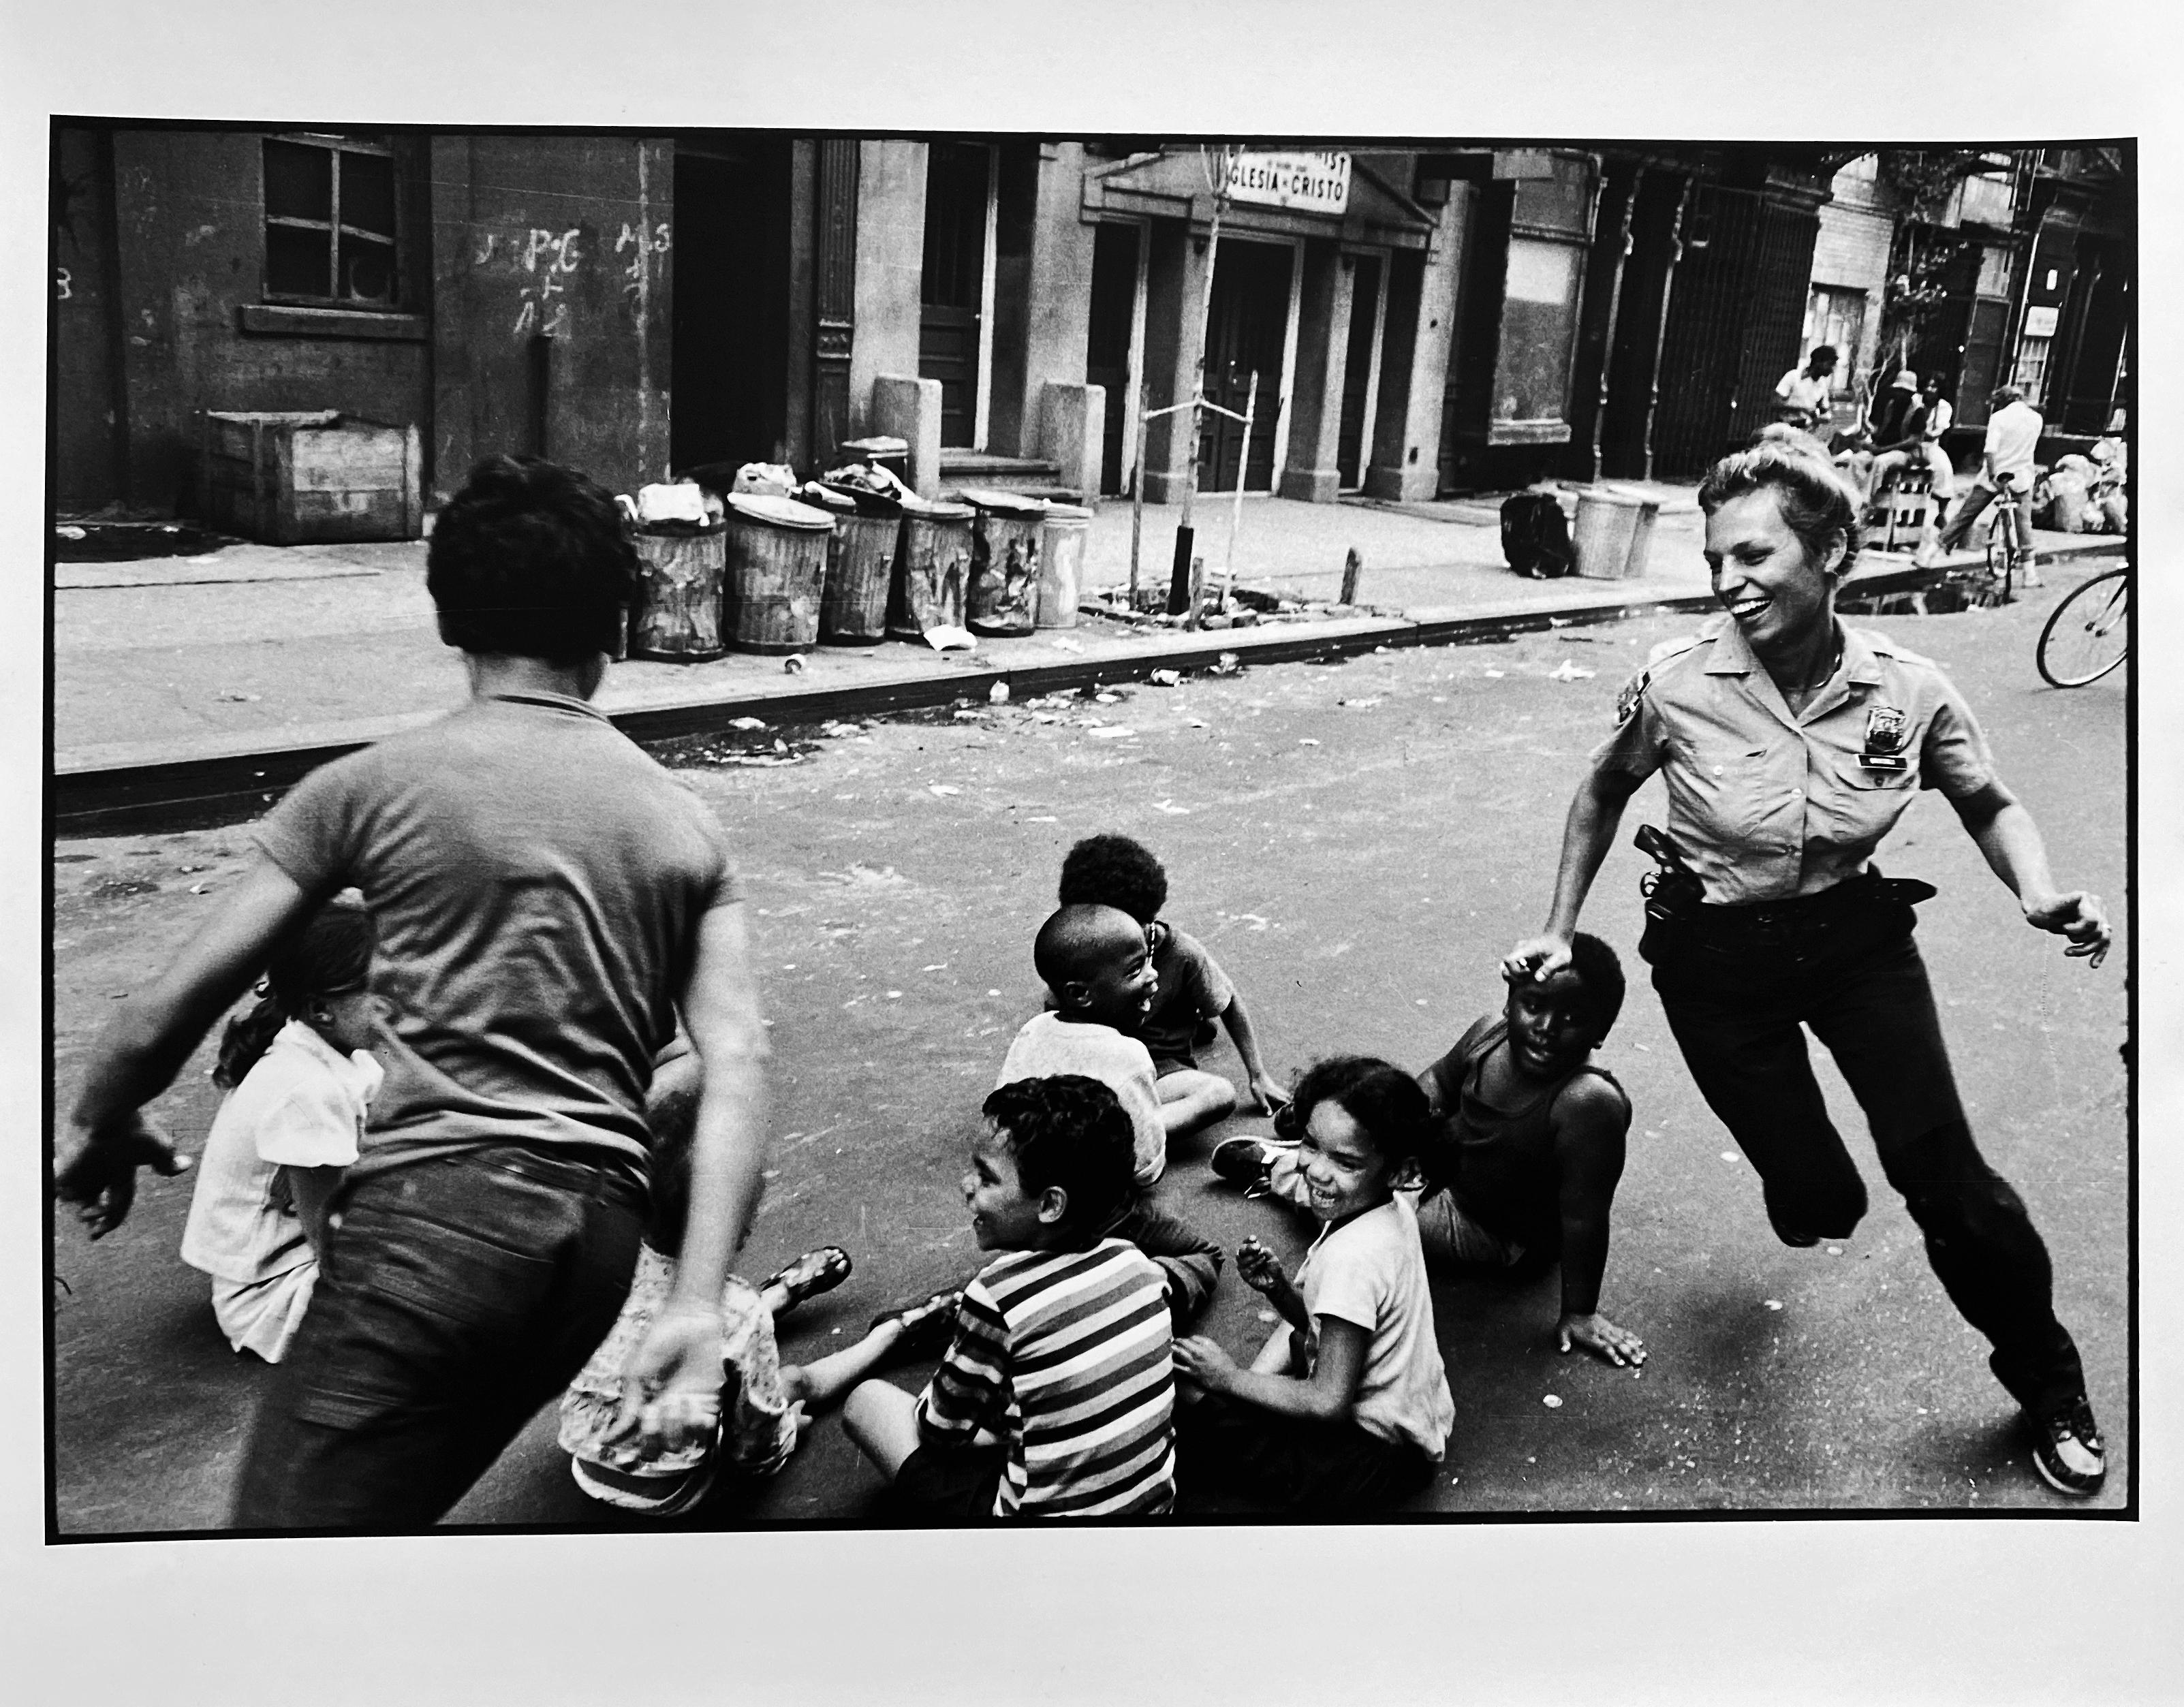 Policewoman Playing Tag, New York City, Police Series Street Photography 1970s